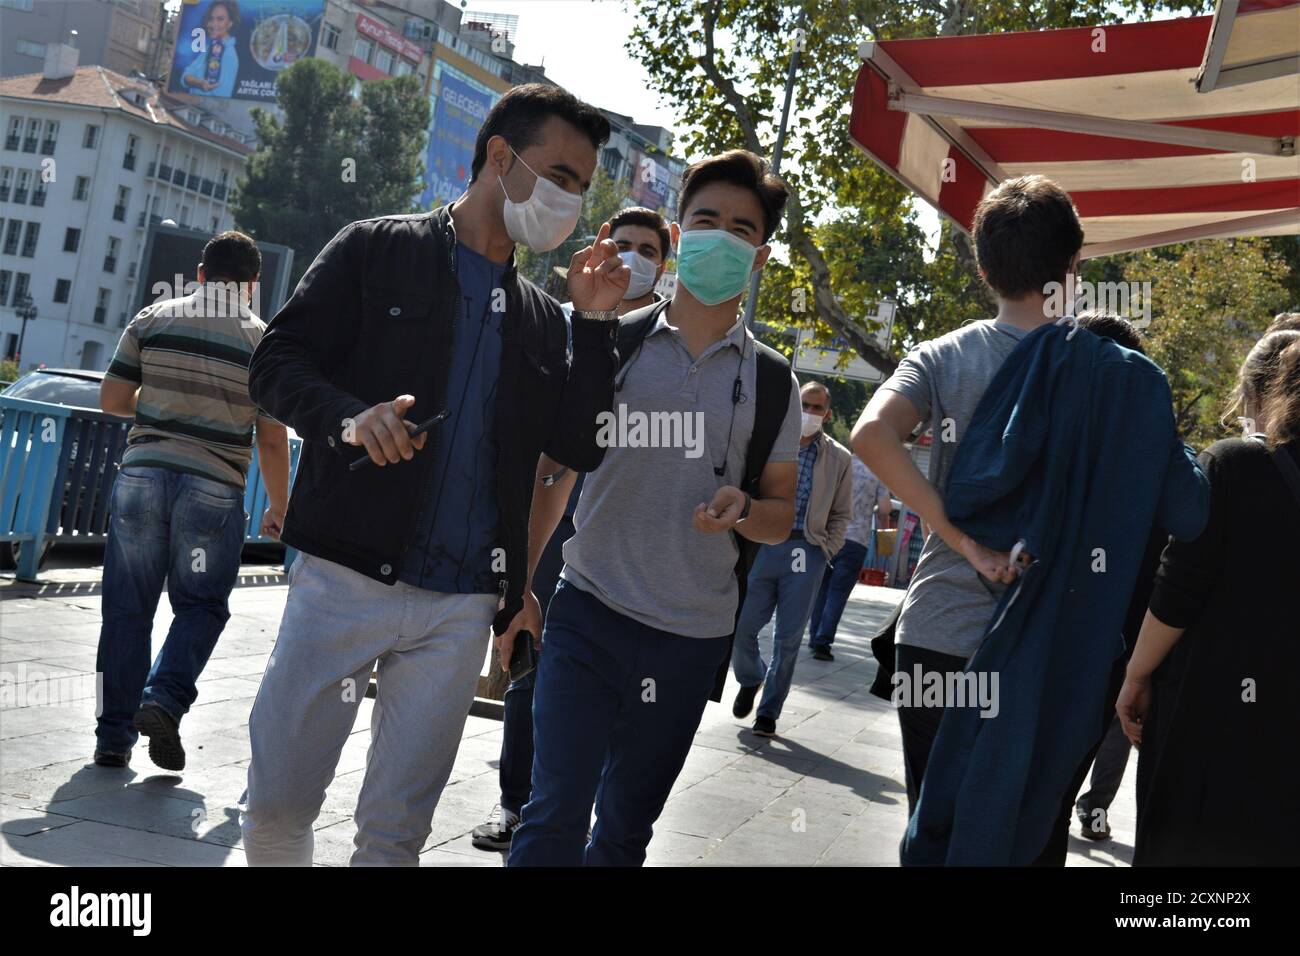 Ankara, Turkey. 1st Oct, 2020. Two young men wearing protective face masks walk along a street in Sihhiye district amid the coronavirus (COVID-19) outbreak. Turkish Minister of Health Fahrettin Koca admitted on September 30 that asymptomatic cases of the coronavirus are deliberately excluded from daily reports. The minister's statement came after the revelation of a document showing nearly 20 times more cases than the official daily figures. Credit: Altan Gocher/ZUMA Wire/Alamy Live News Stock Photo